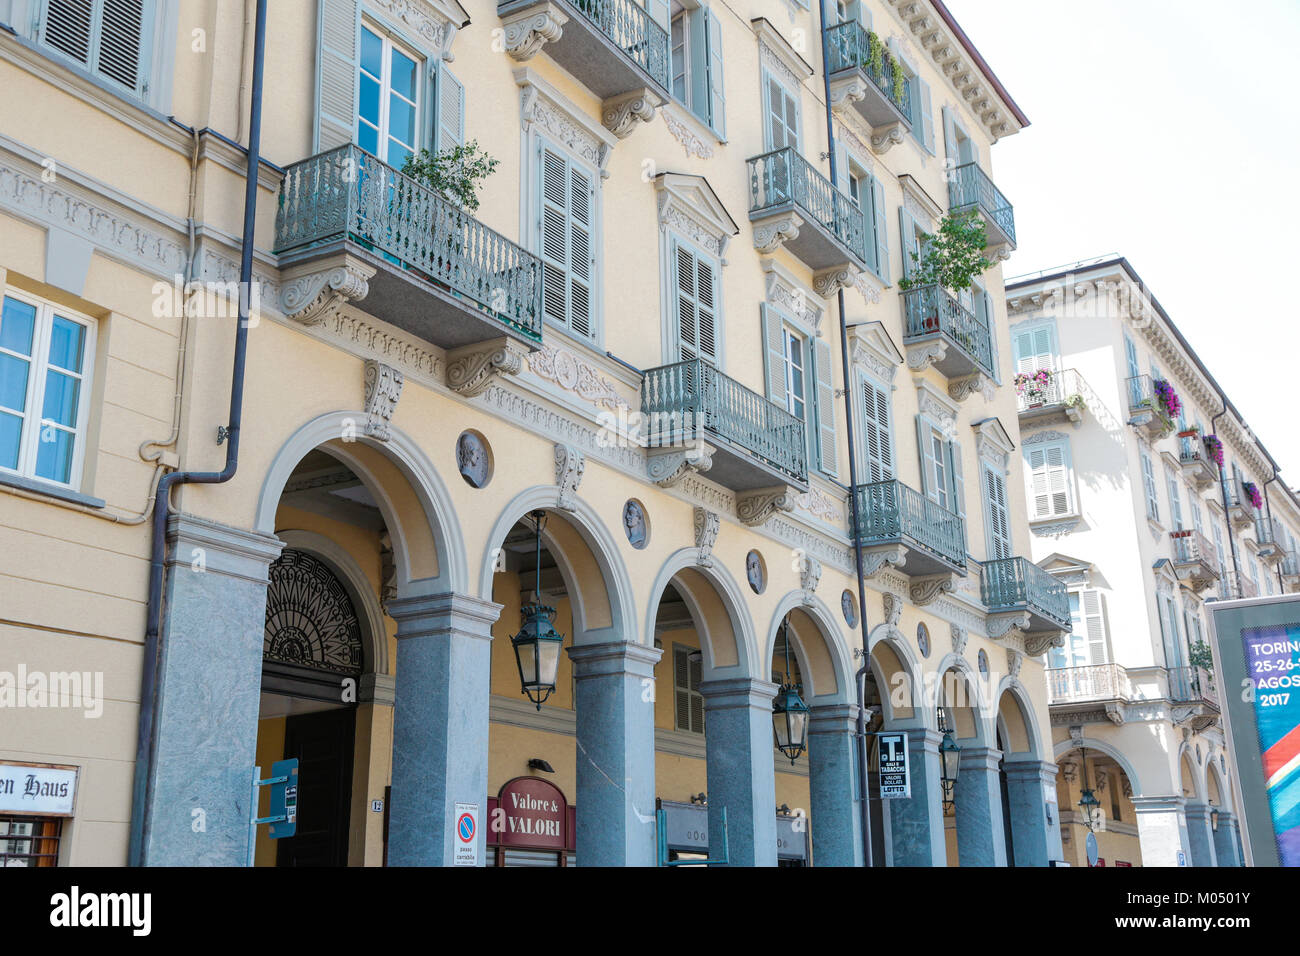 Turin, Italy: Conservatorio Giuseppe Verdi in Piazza Bodoni and historical palaces around via Mazzini n the city center, external view, in a sunny day Stock Photo